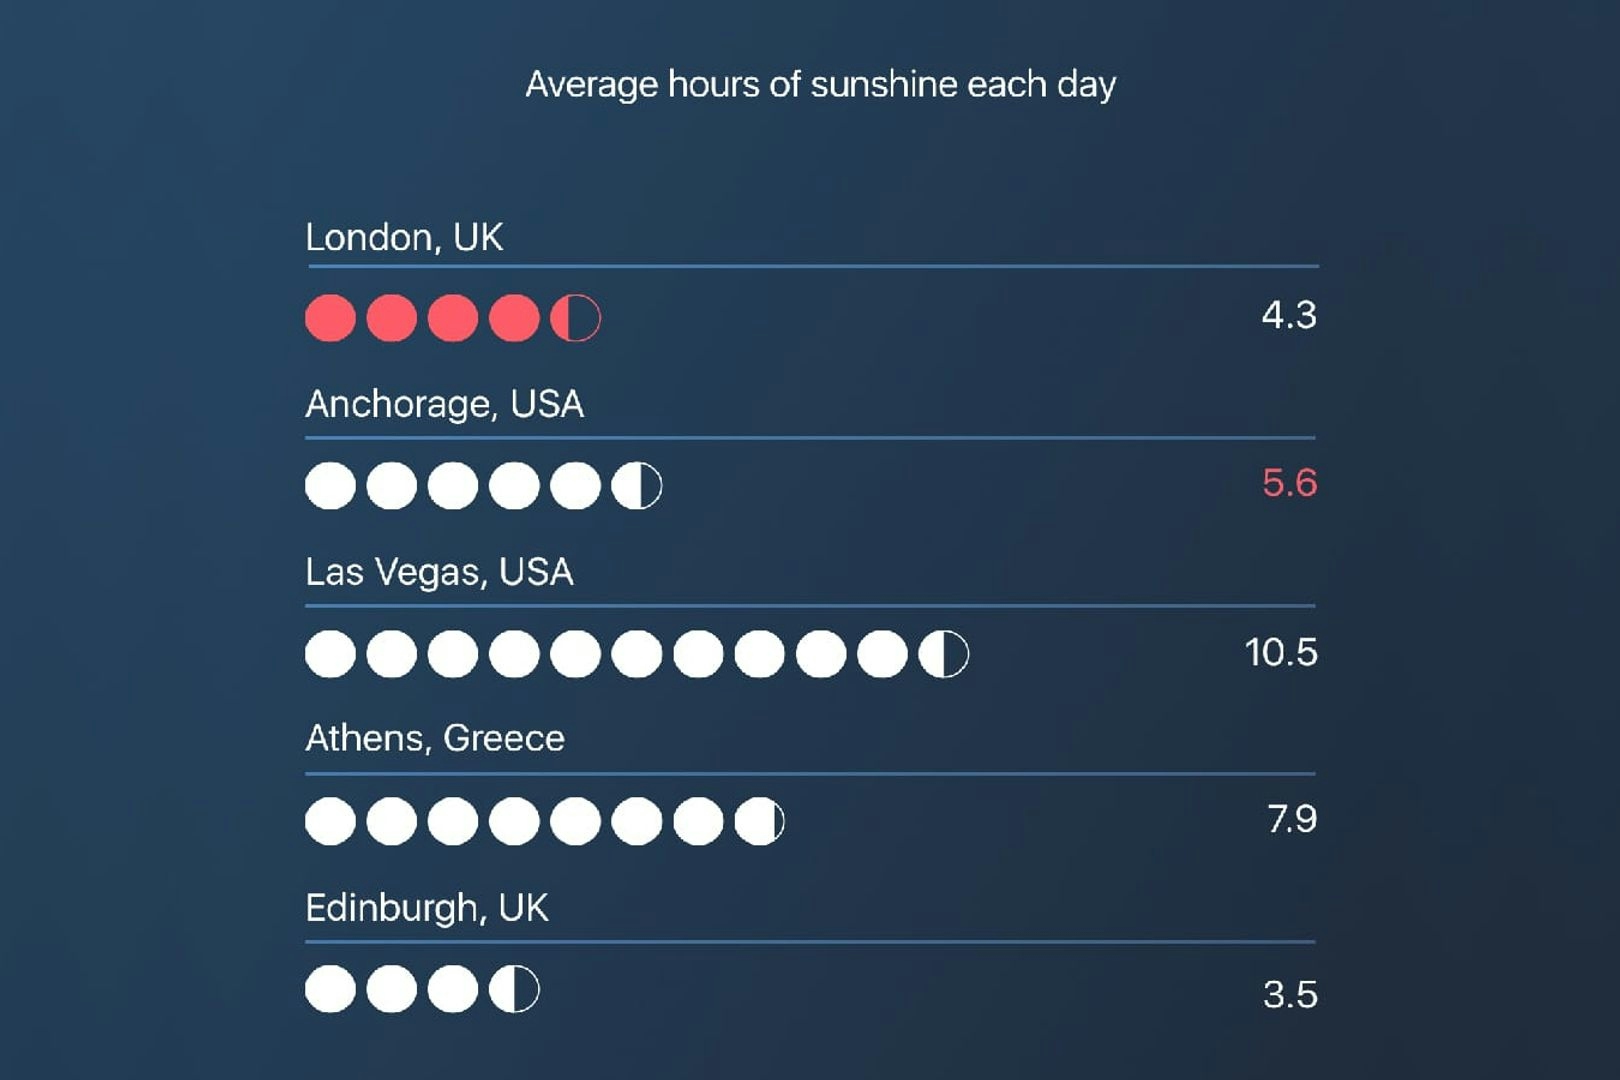 An answer from the Great British Quizulization that shows average hours of sunshine each day. It shows Edinburgh, UK has the lowest at 3.5. The highest is Las Vegas, USA with 10.5 hours per day on average.